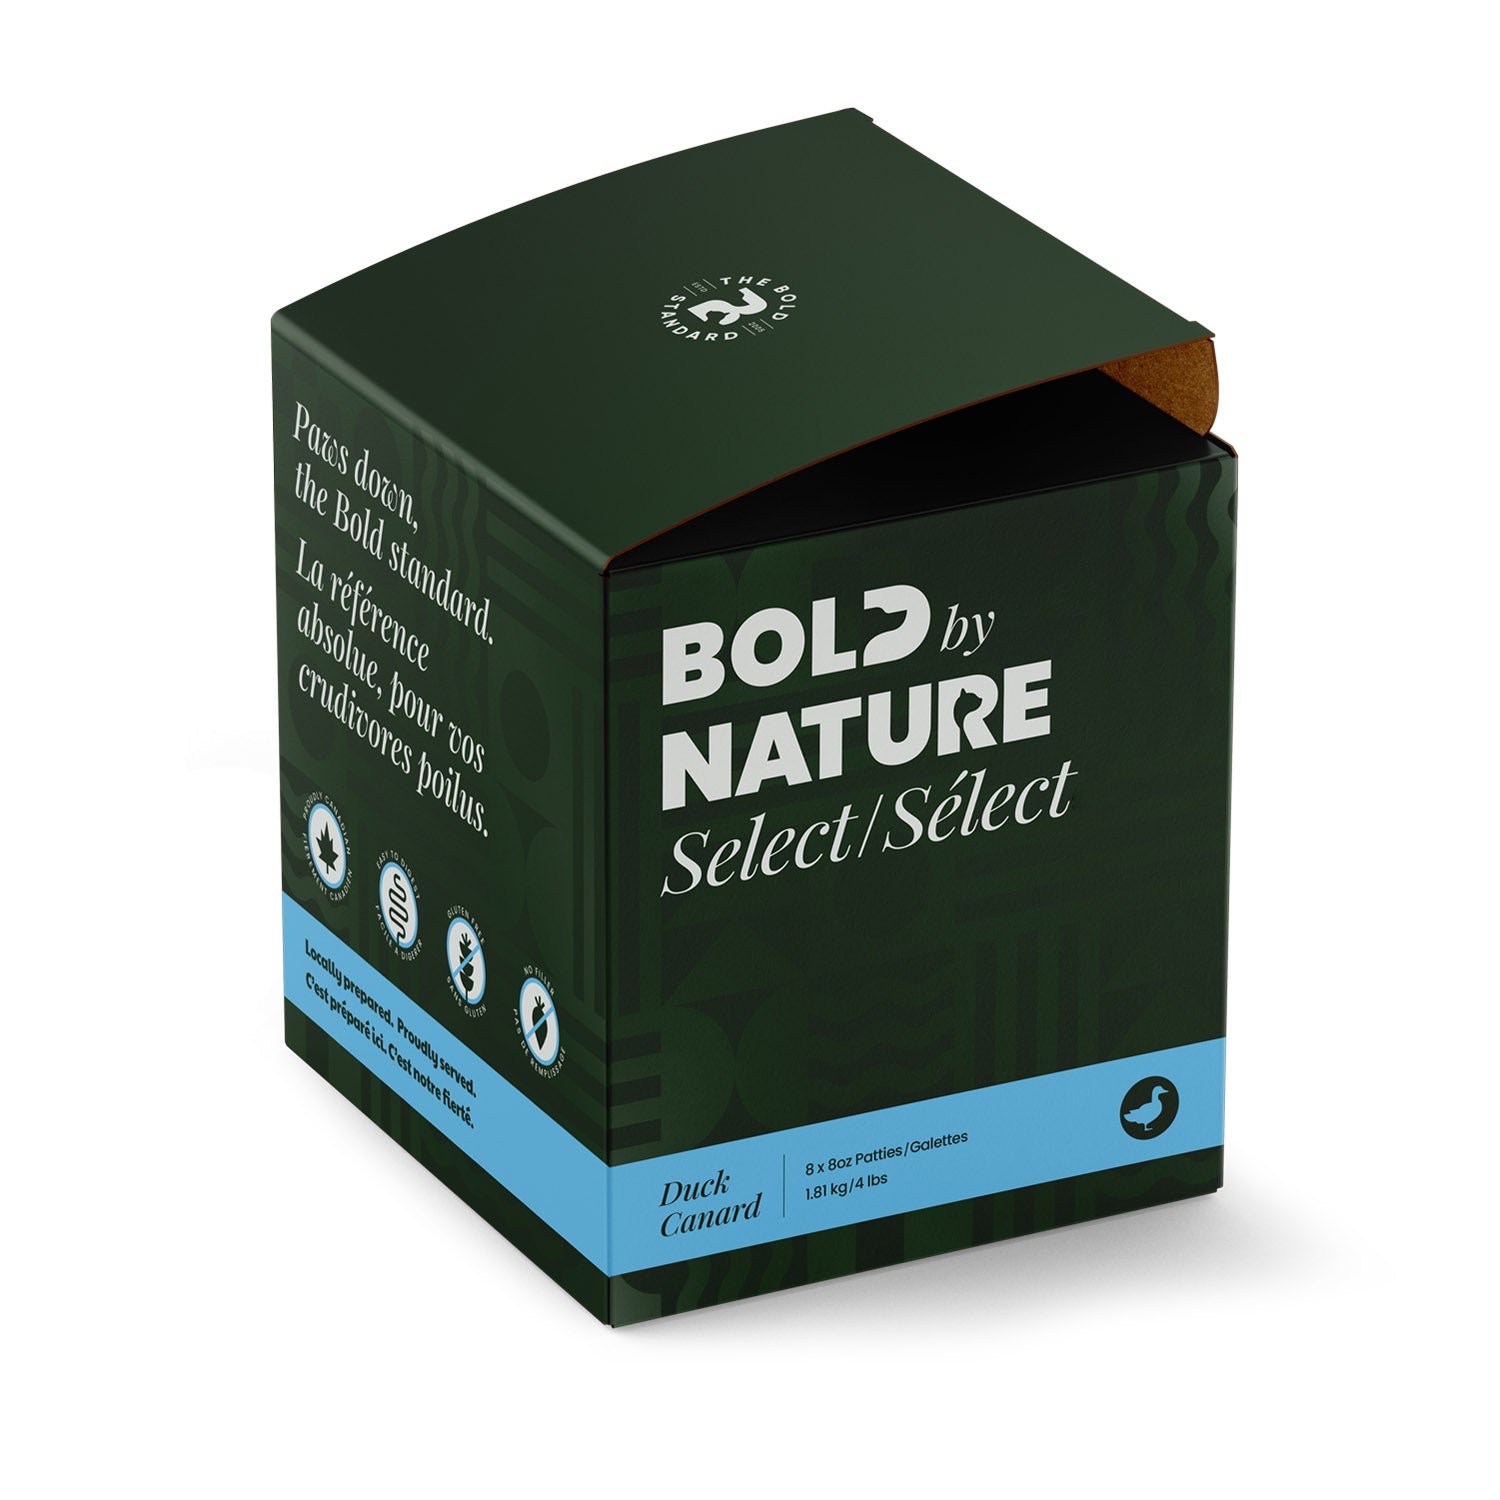 Bold by Nature (Bold Raw) - Select Duck - Frozen Product